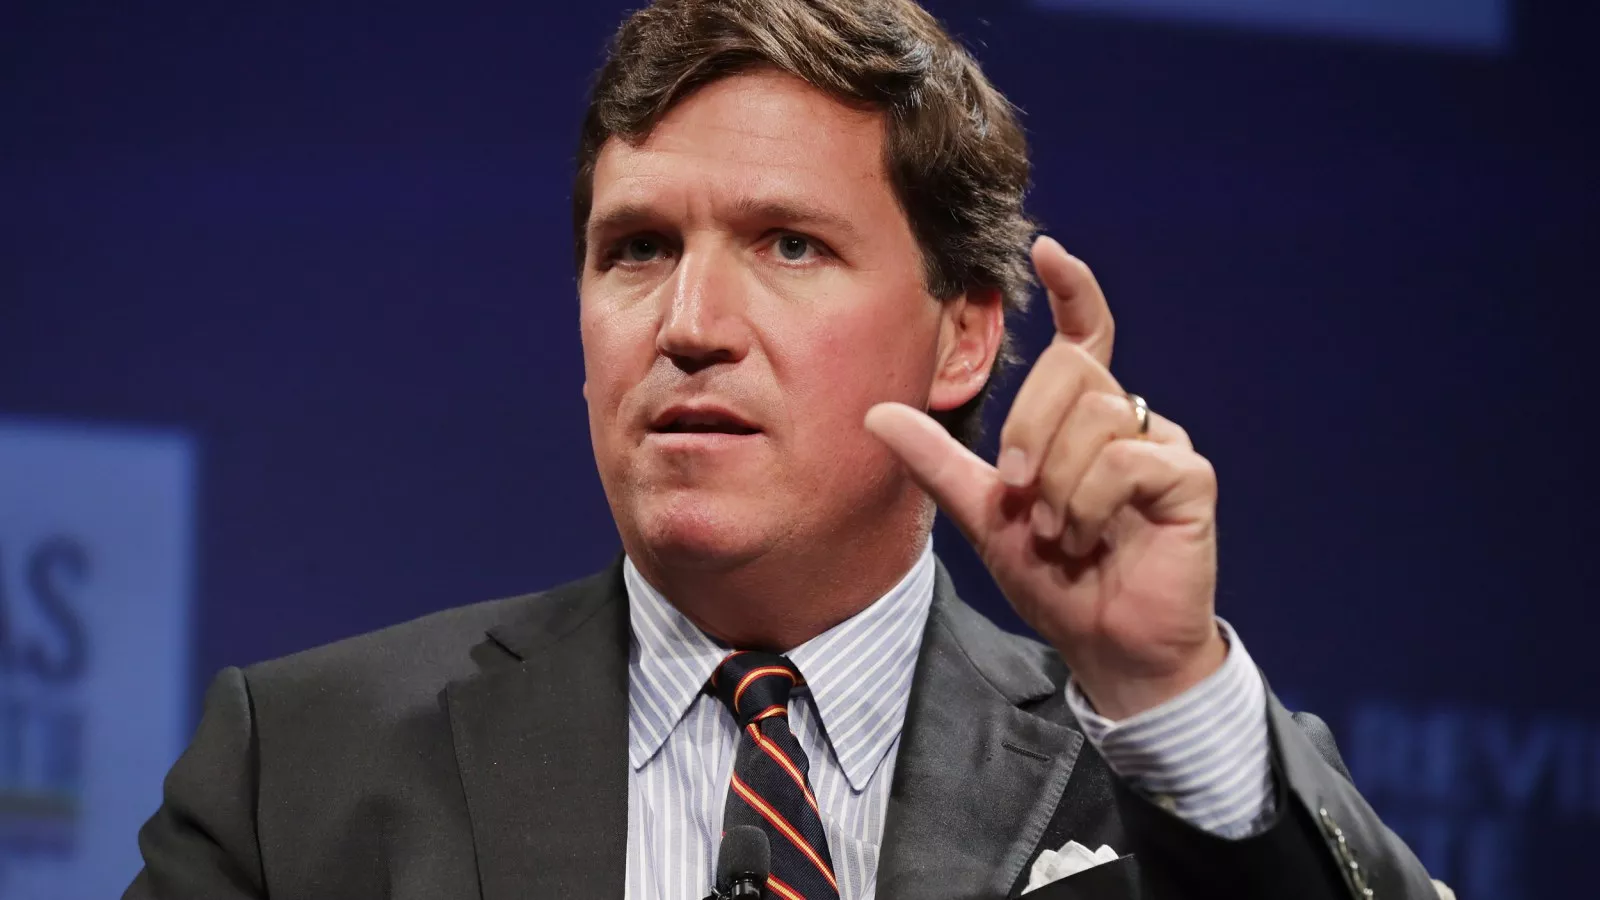 Video of Tucker Carlson Repeatedly Touting ‘Replacement Theory’ Goes Viral